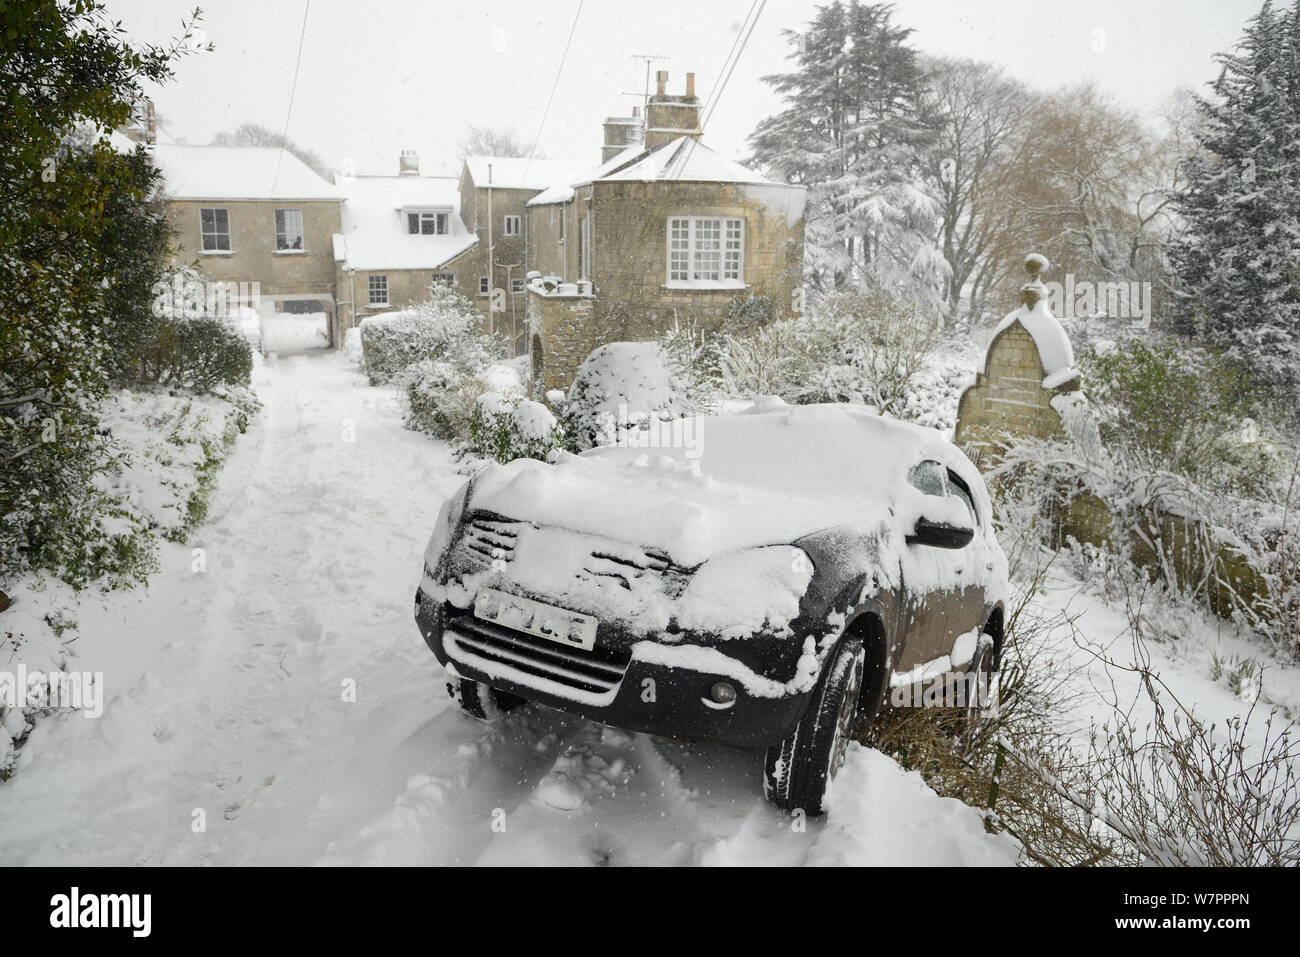 Car that has slid off driveway after losing traction on deep snow, Wiltshire, UK, January 2013 Stock Photo